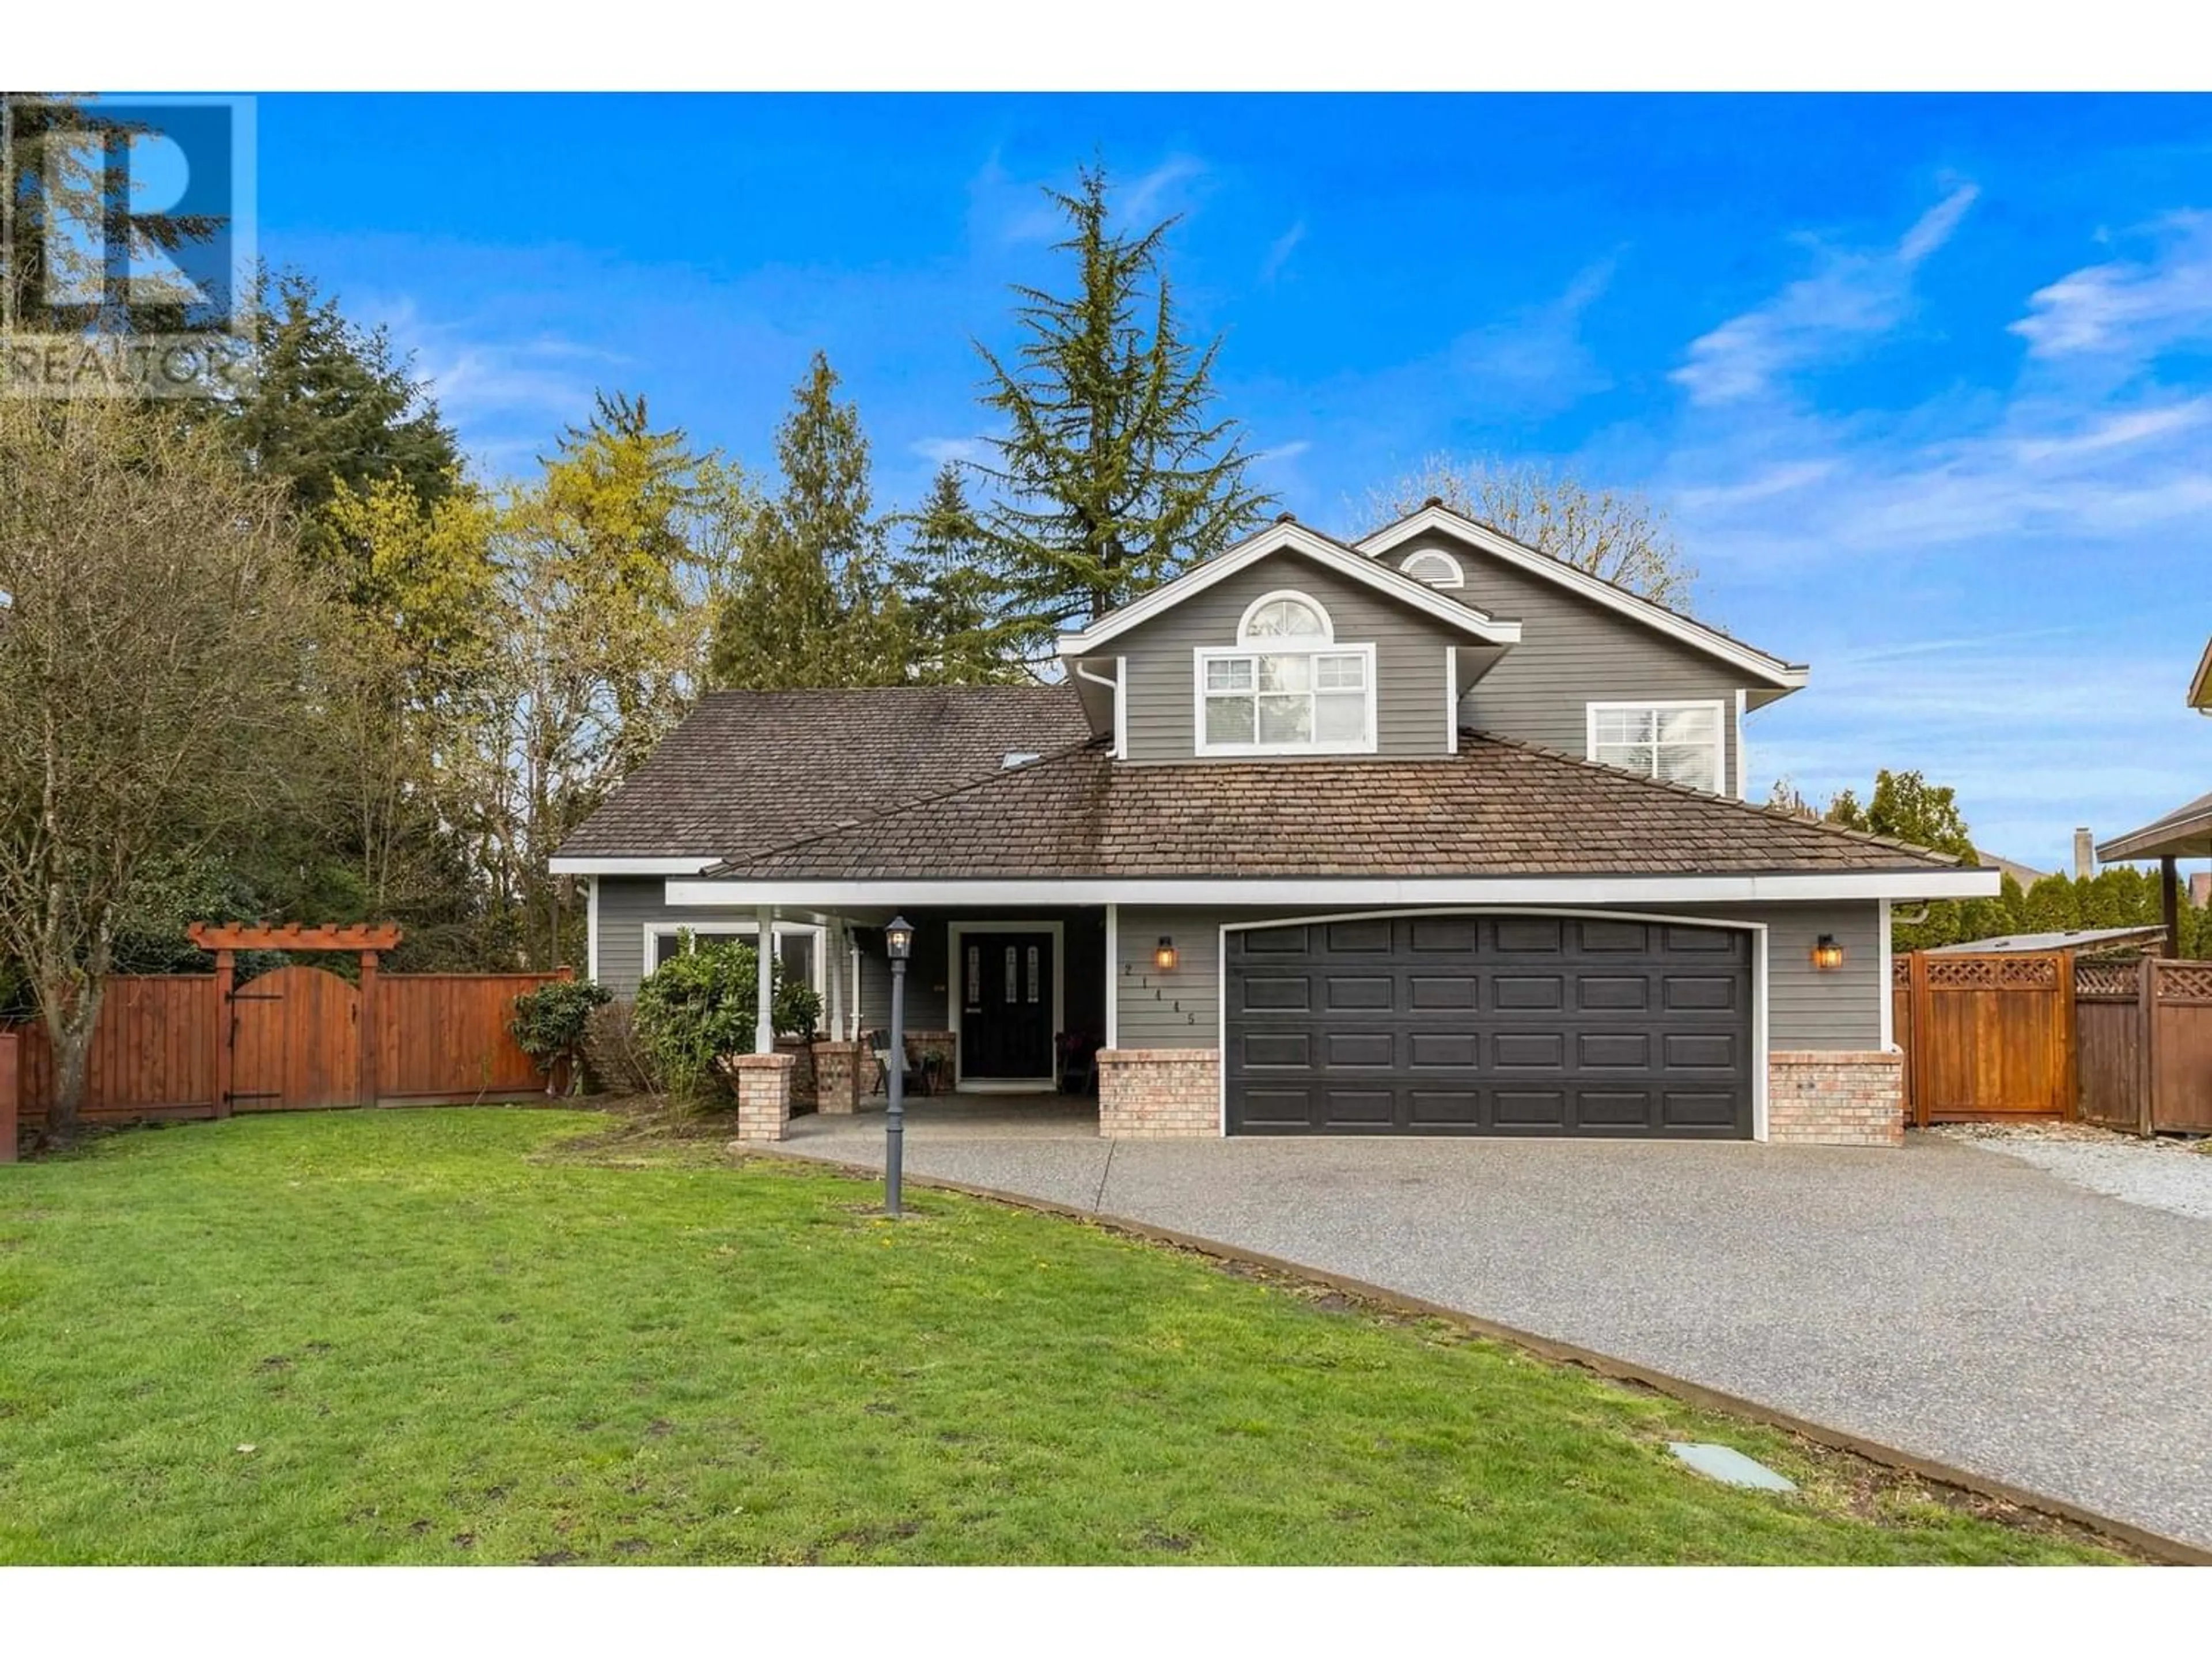 Frontside or backside of a home for 21445 126 AVENUE, Maple Ridge British Columbia V4R2H4